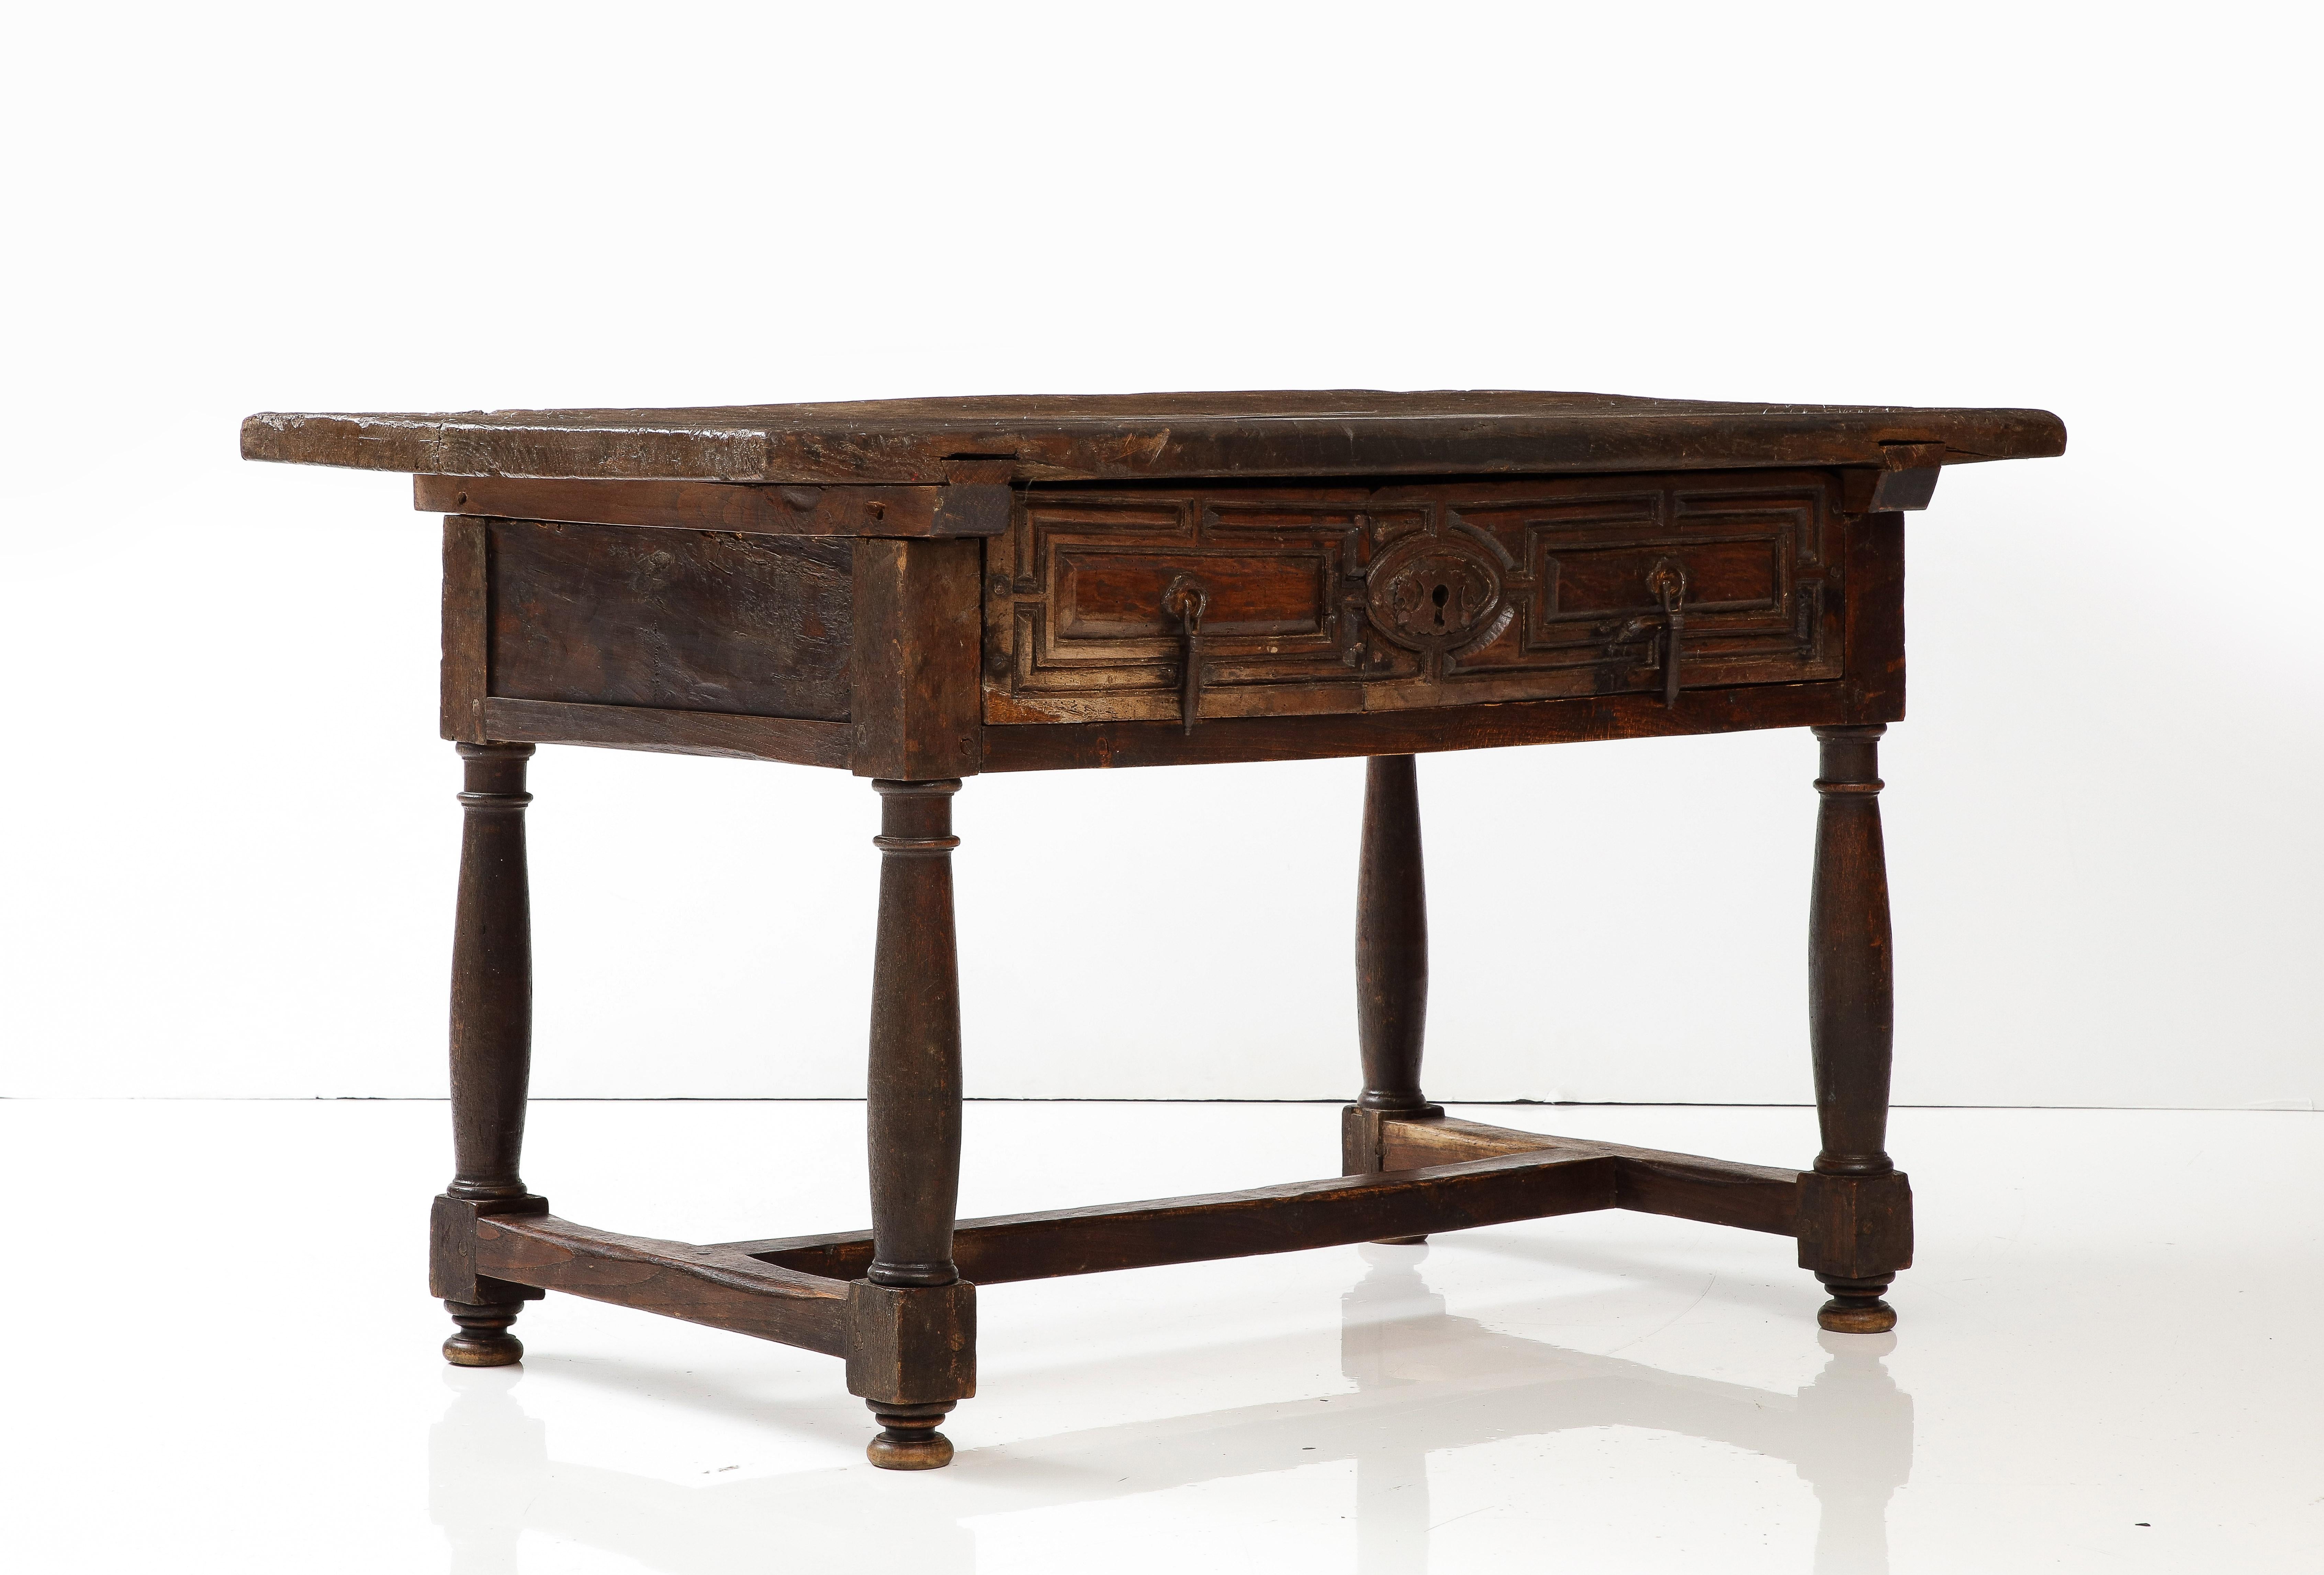 Late 16th C. Spanish Walnut Table with Iron Pulls & Drawers For Sale 8